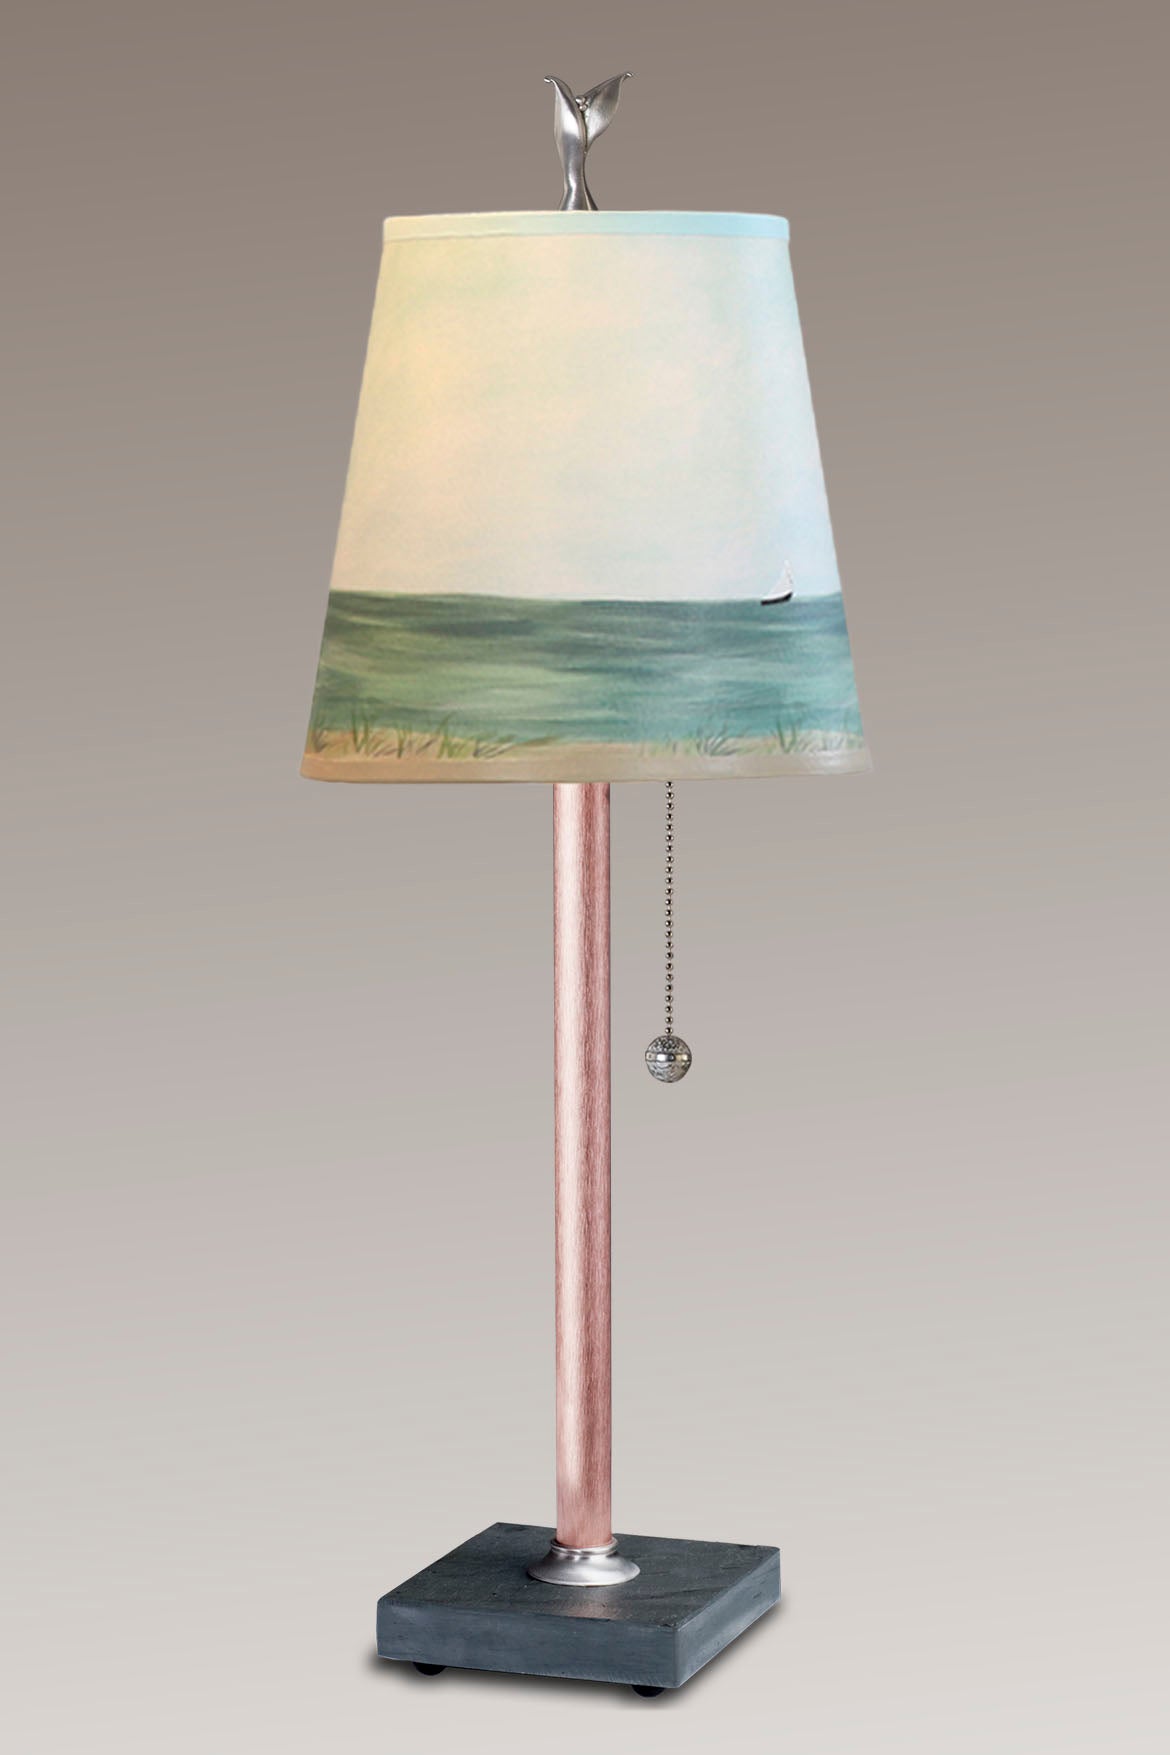 Copper Table Lamp with Small Drum Shade in Shore